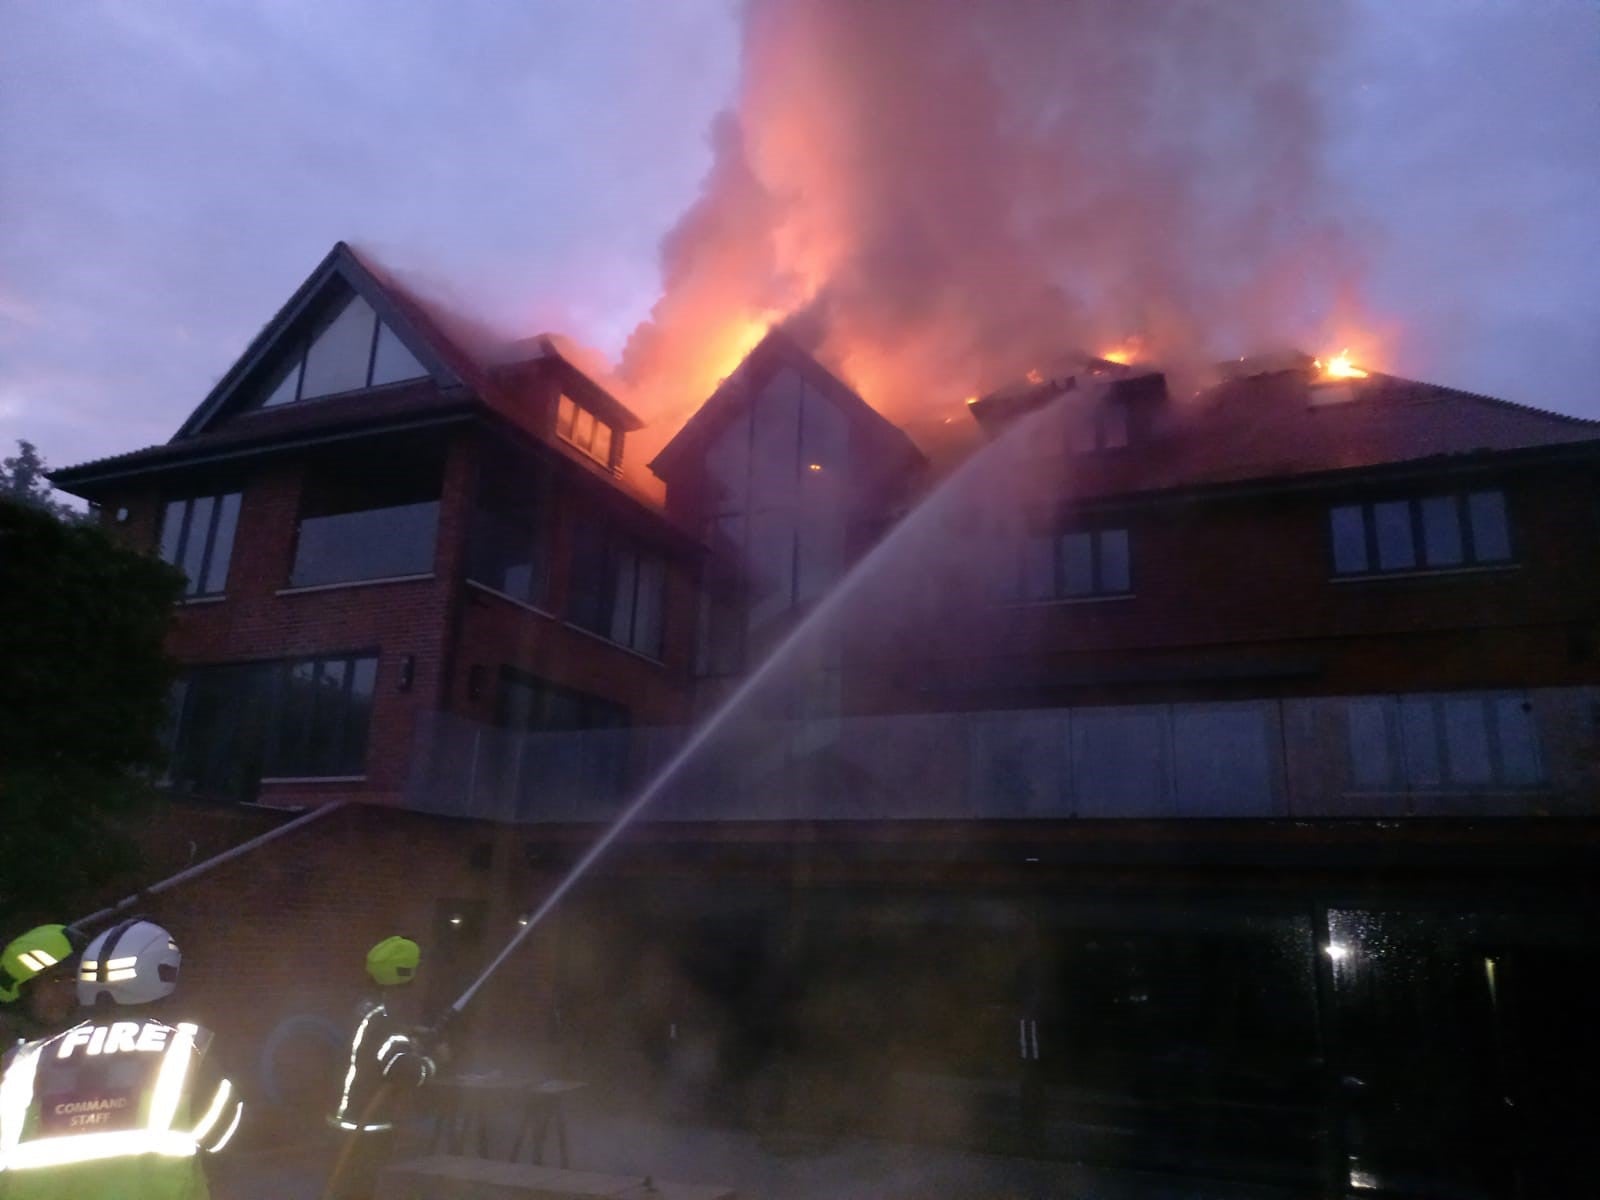 Seventy firefighters tackle blaze at house in south east London